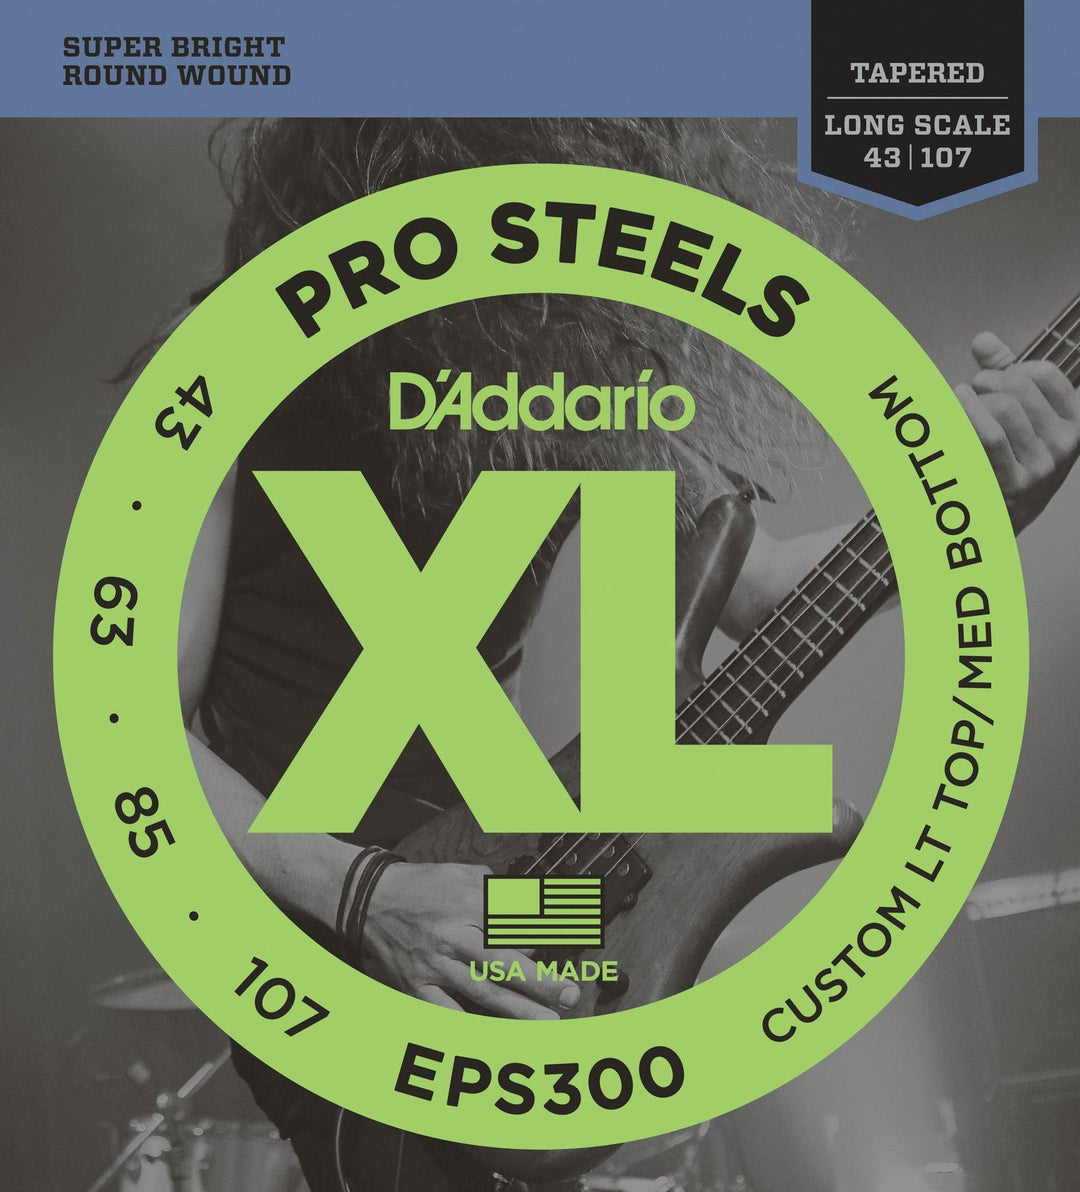 D'Addario ProSteels Bass Guitar String Set, EPS300 Tapered .043-.107 - A Strings